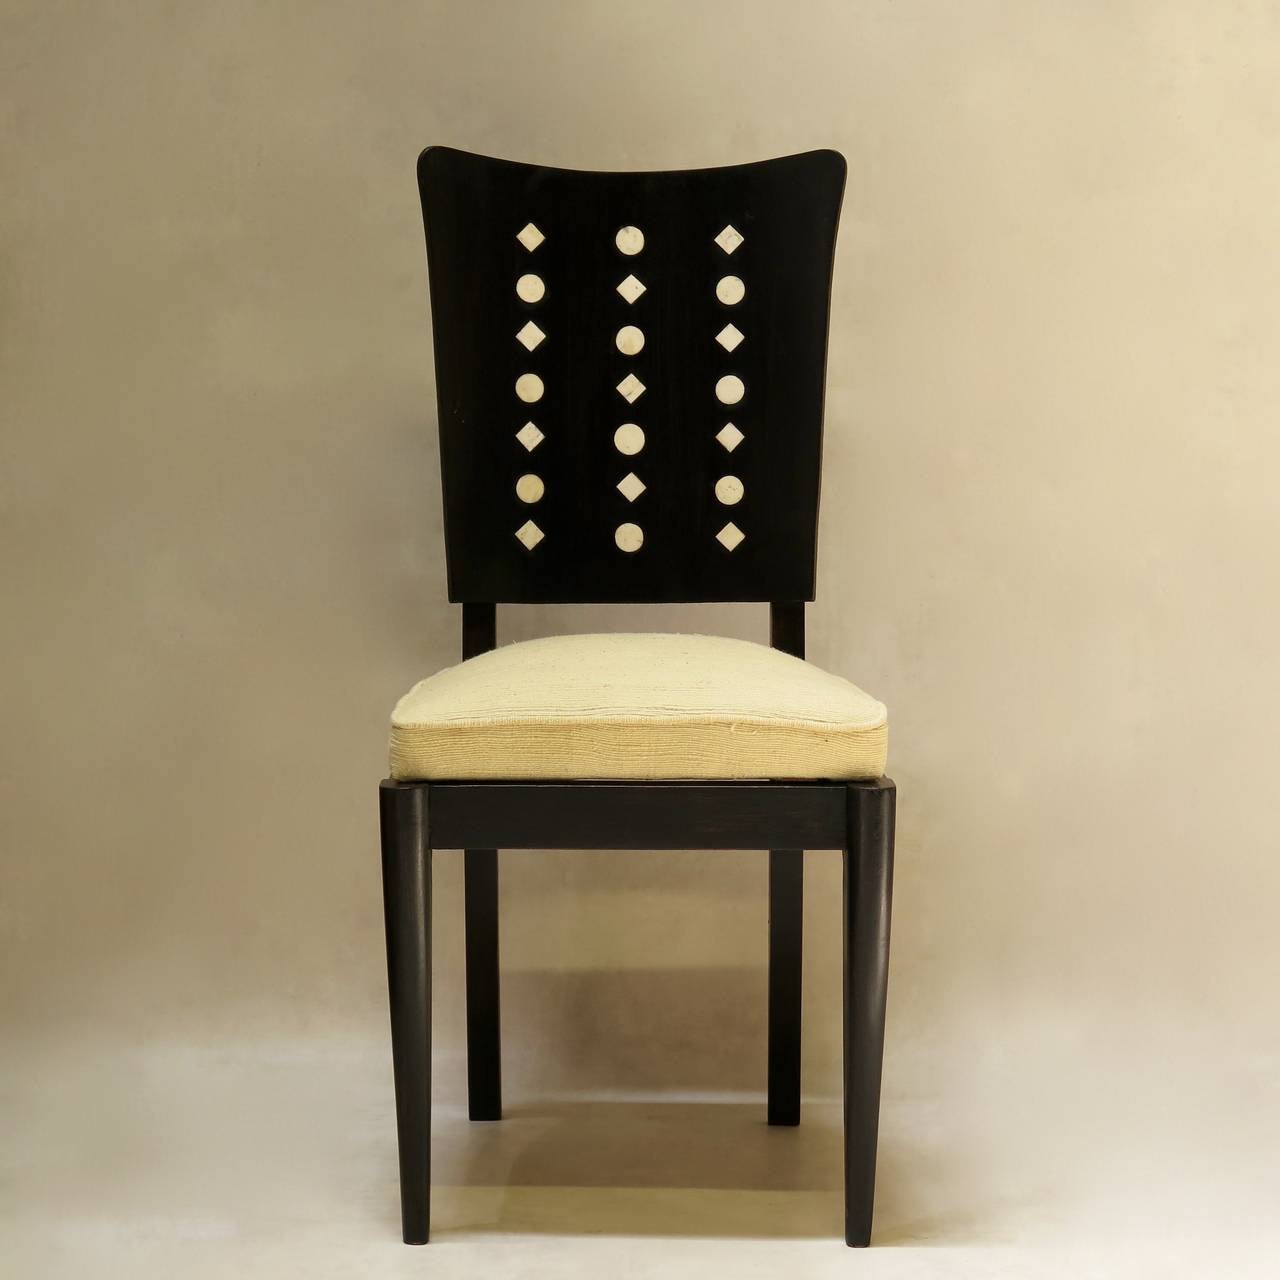 Set of six Art Deco dining room chairs in ebonized wood with generous curved backs inlaid with a design of circles and lozenges. The seats have been newly upholstered with vintage, textured off-white fabric.